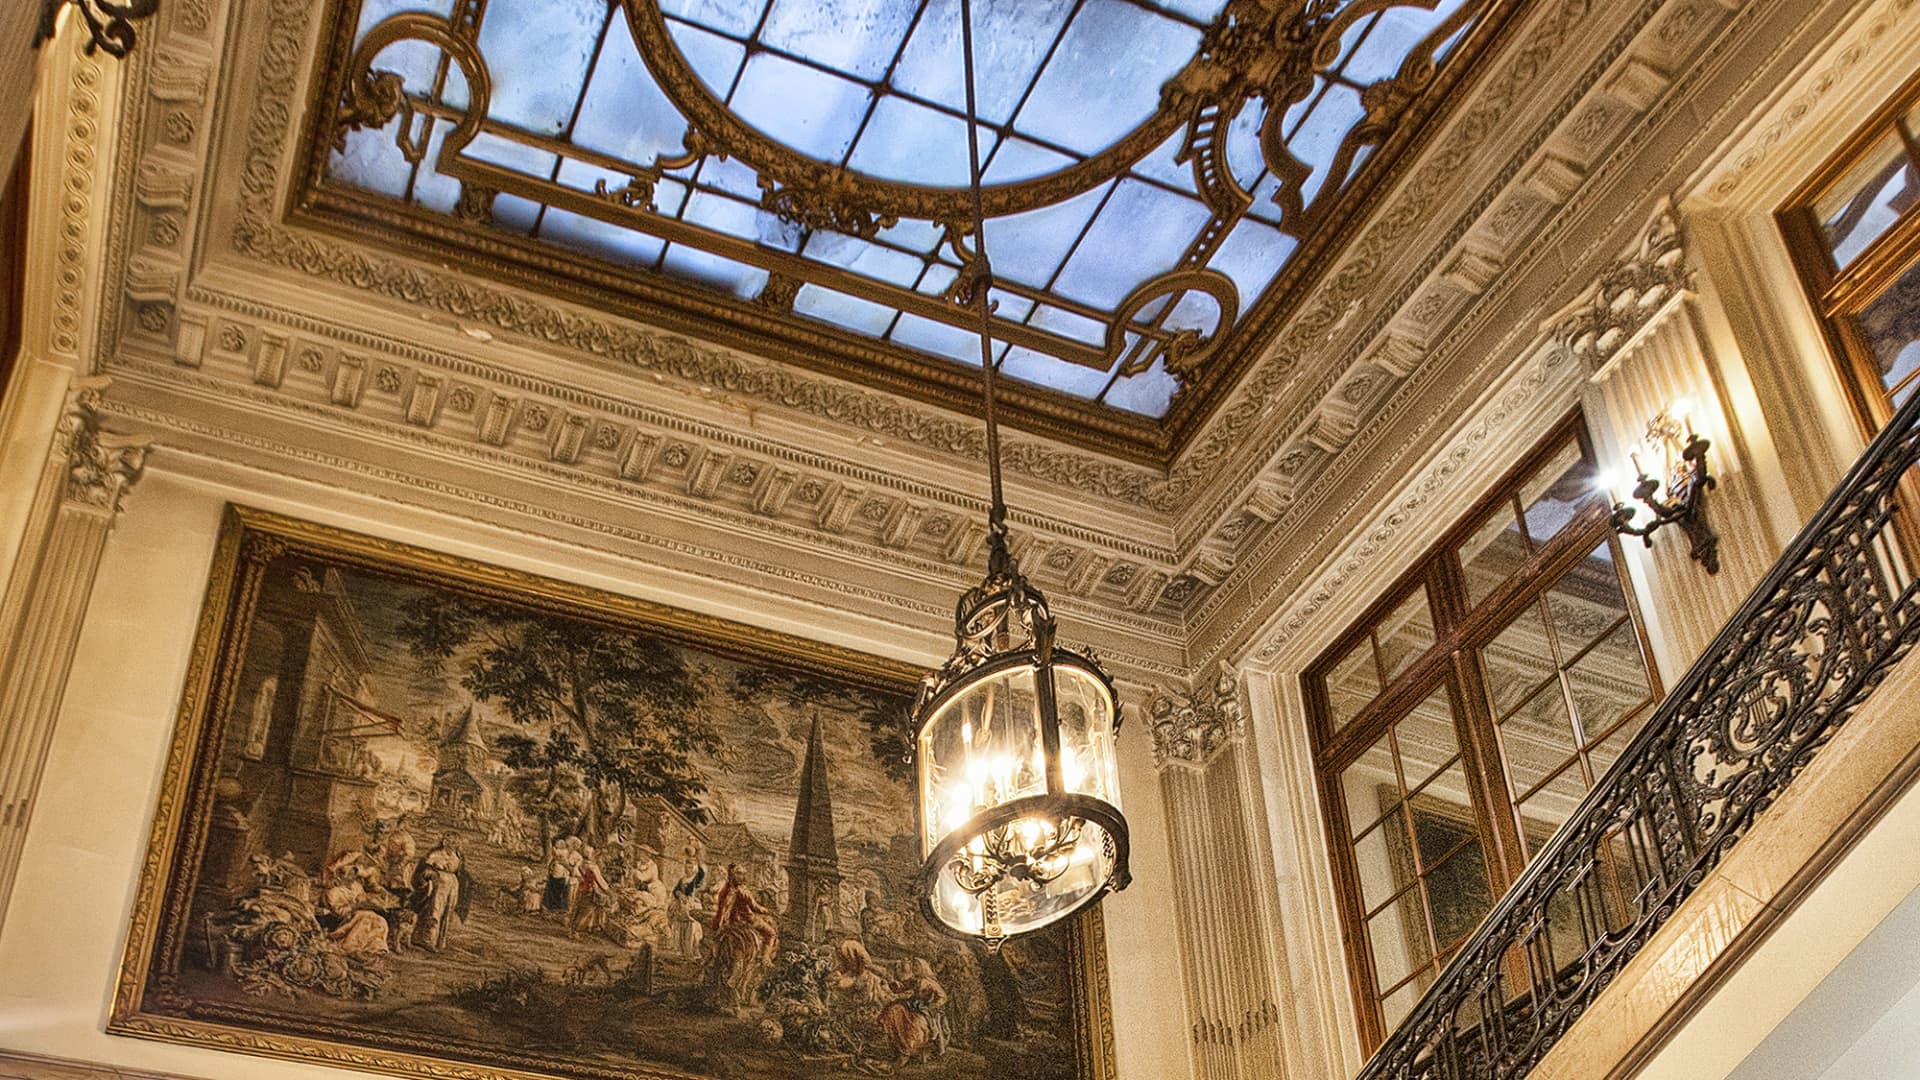 The skylight over the grand foyer is held in place by a gold-plated frame.